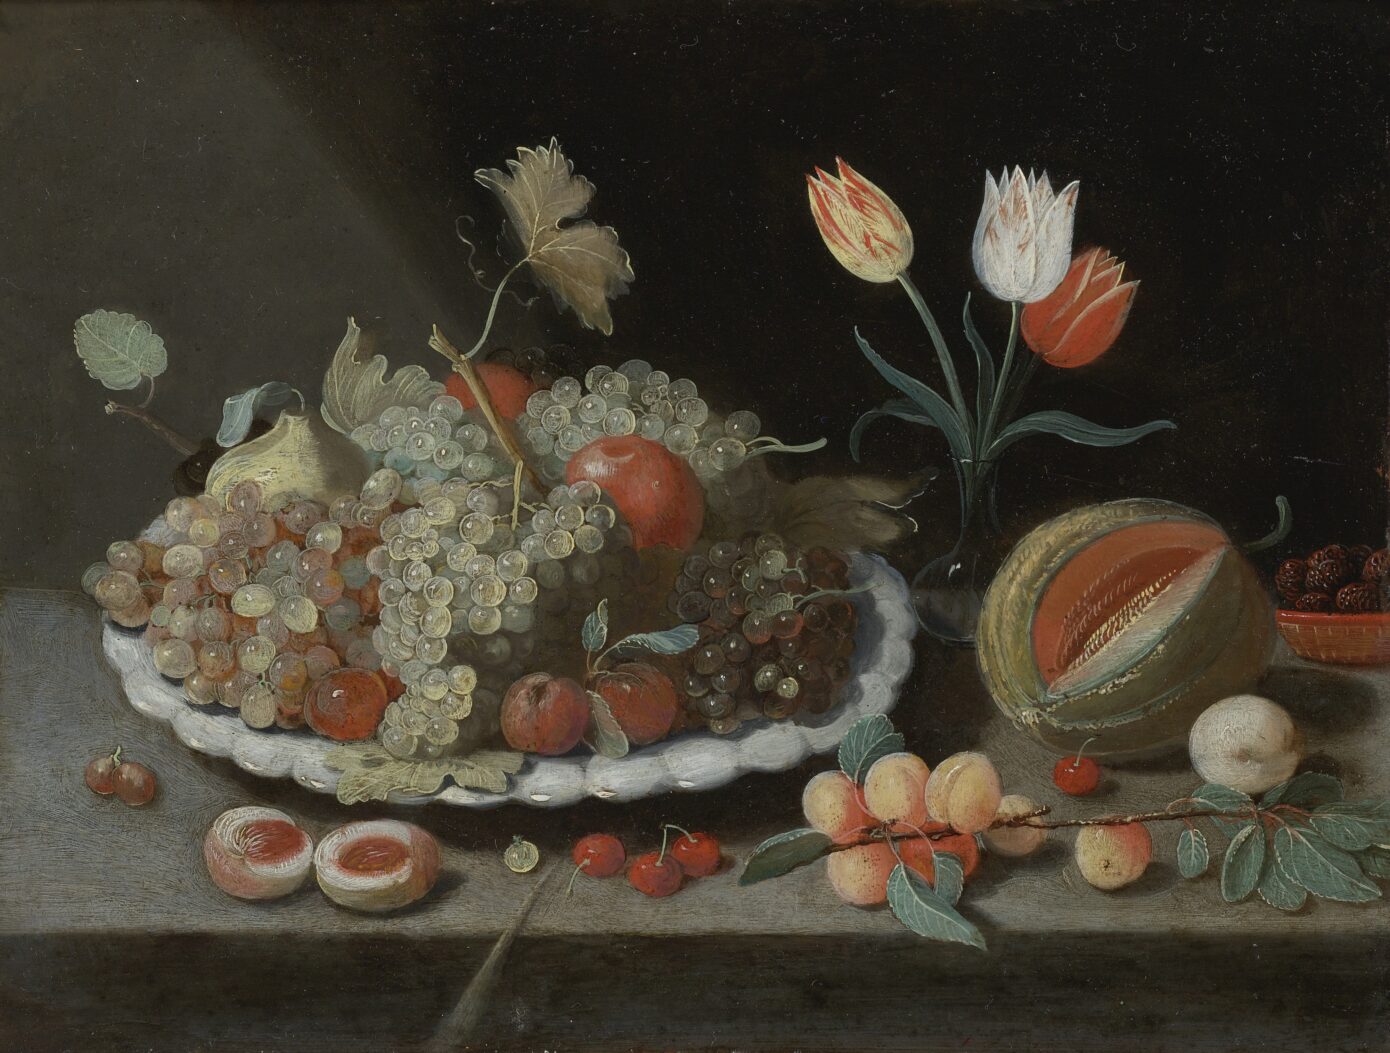 Still life with grapes and other fruit on a platter, a glass vase with tulips, a melon, apricots, cherries and other fruits, all on a ledge